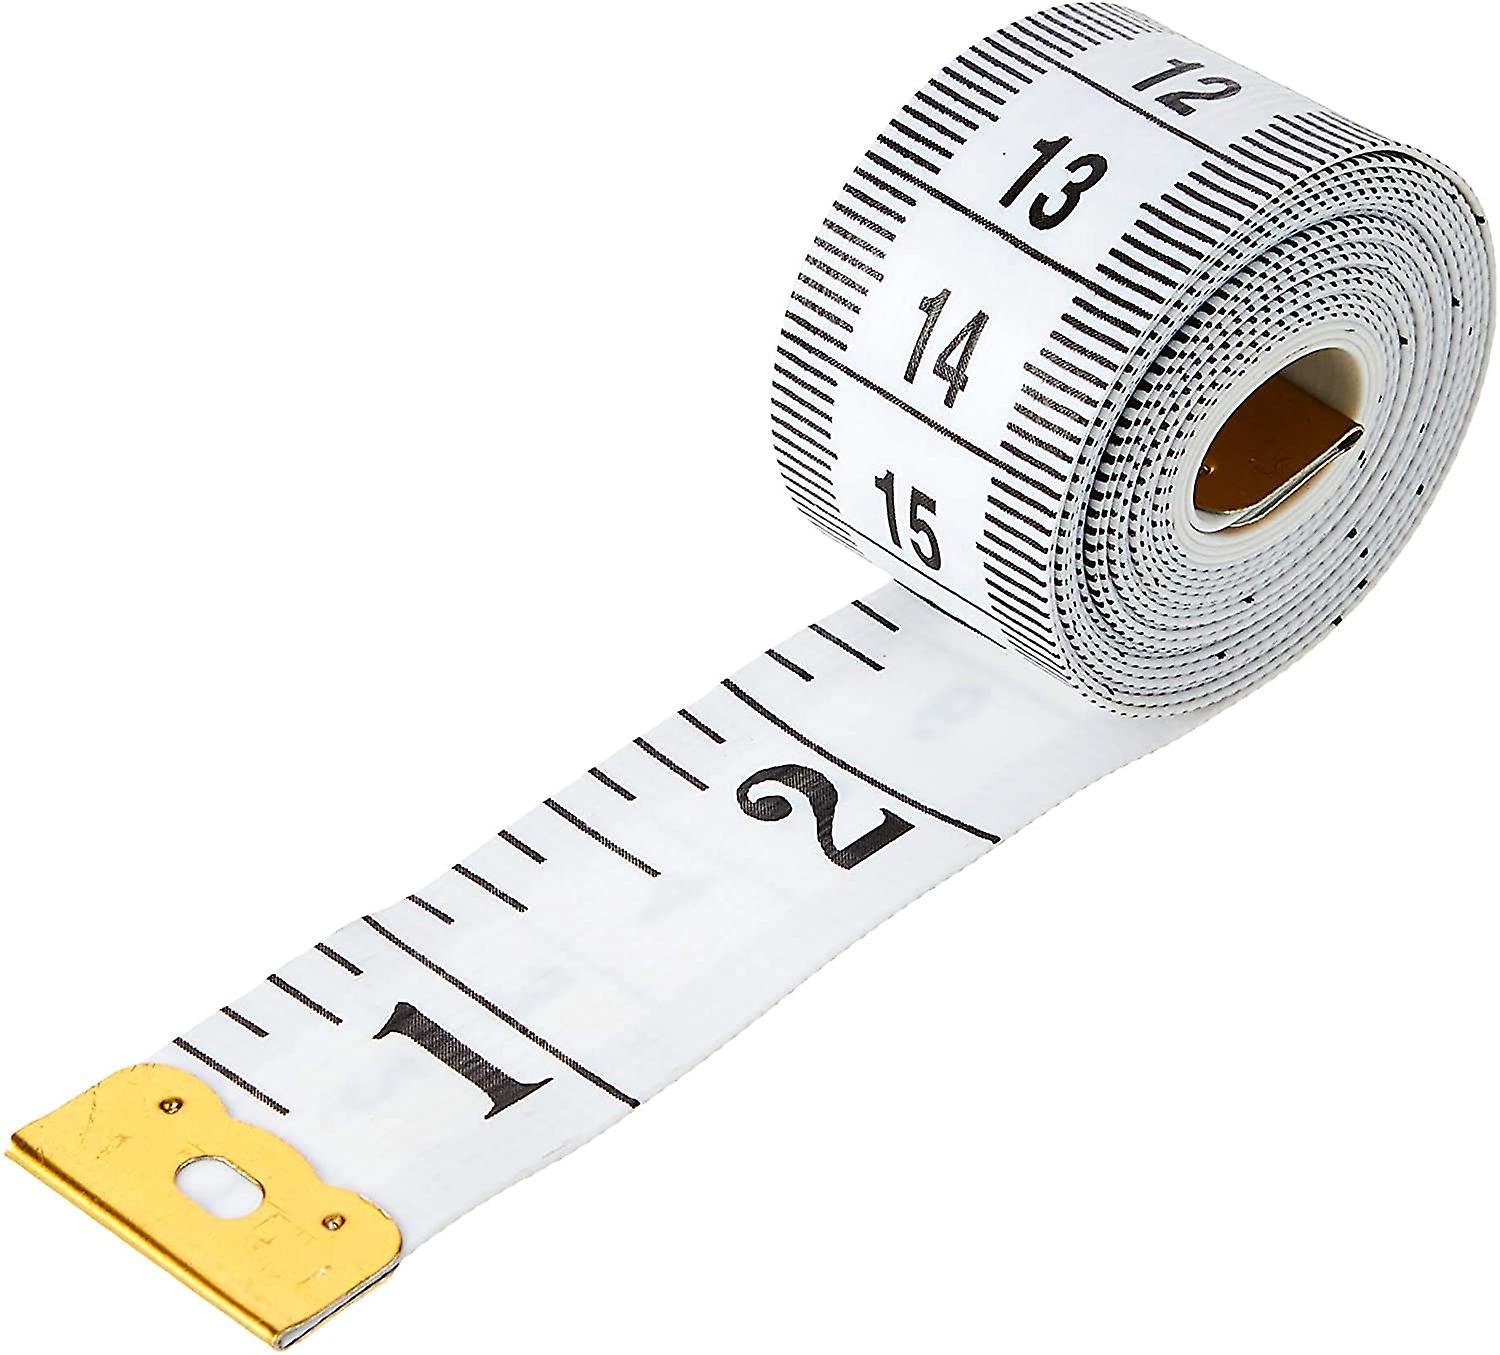 What Do The Lines On A Measuring Tape Mean